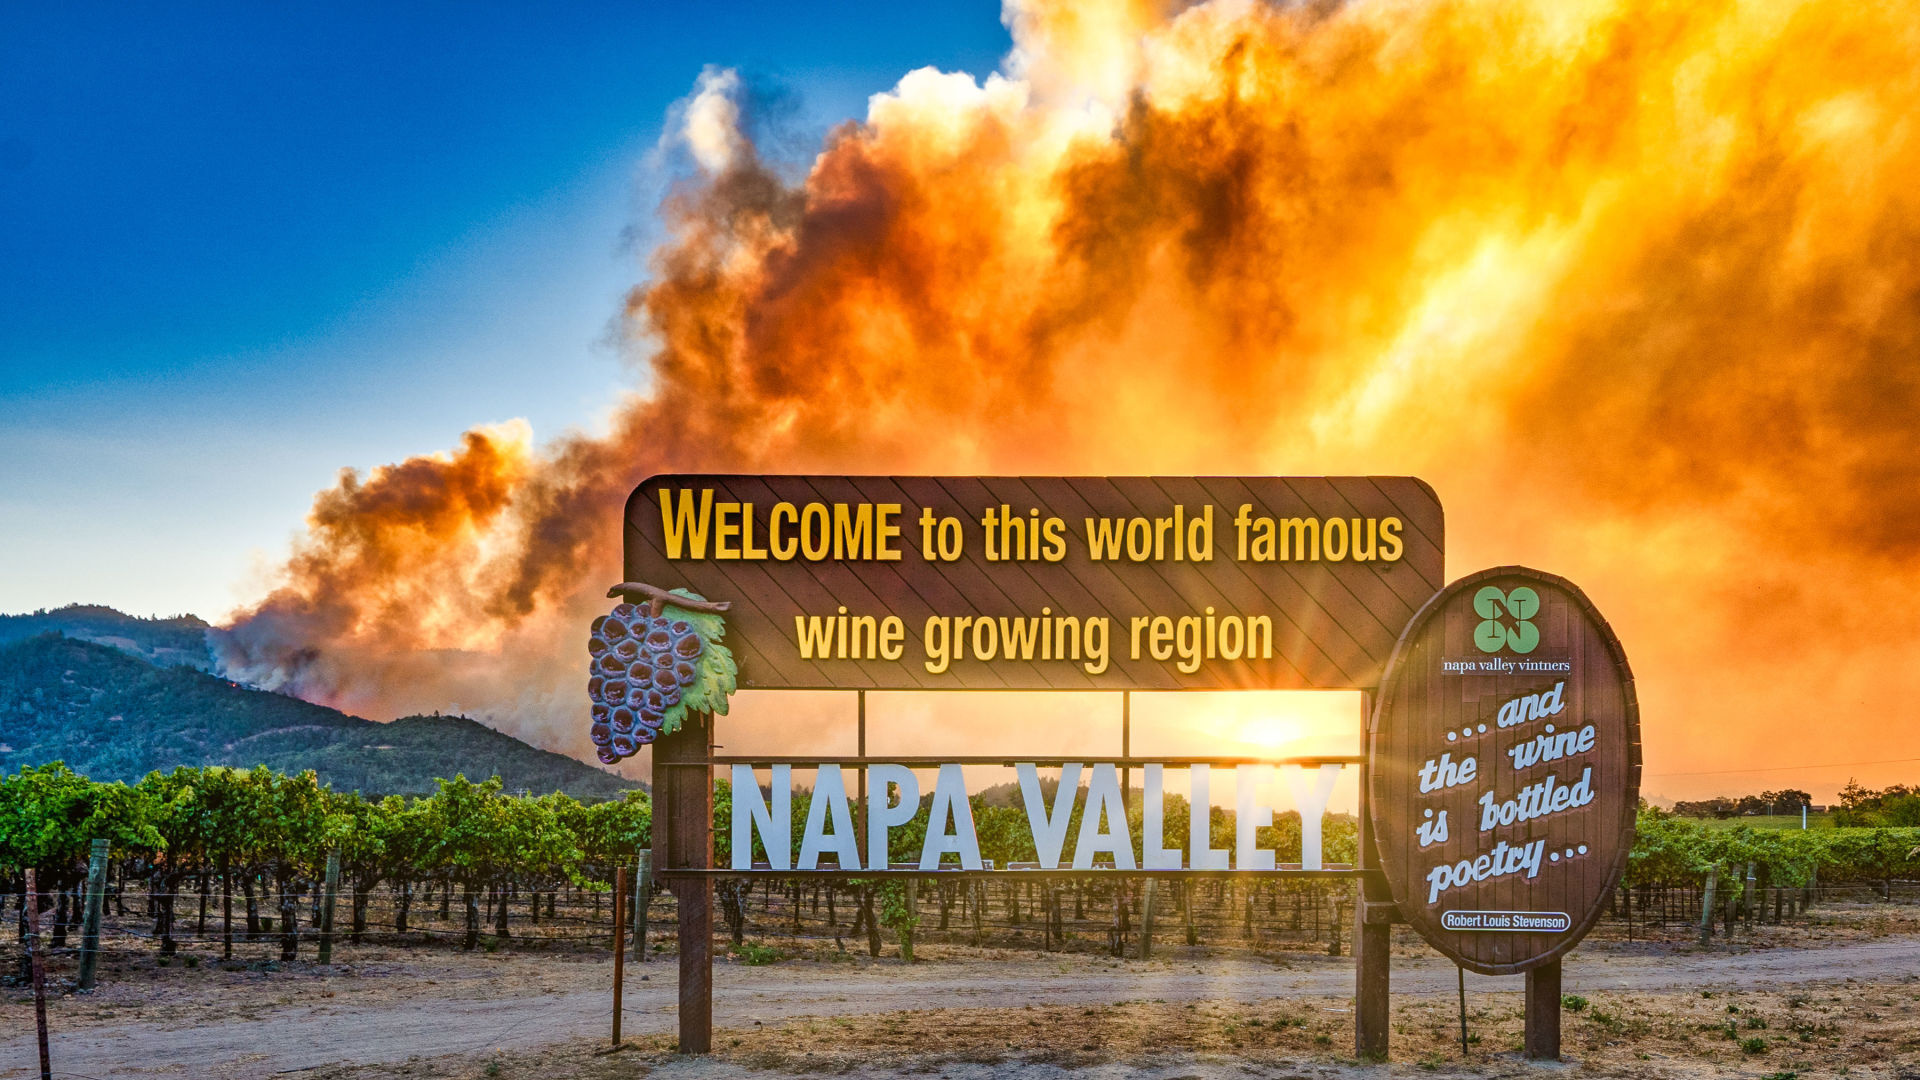 Challenging year for Napa Valley, Wine industry struggles, 2020 recap, Local news, 1920x1080 Full HD Desktop